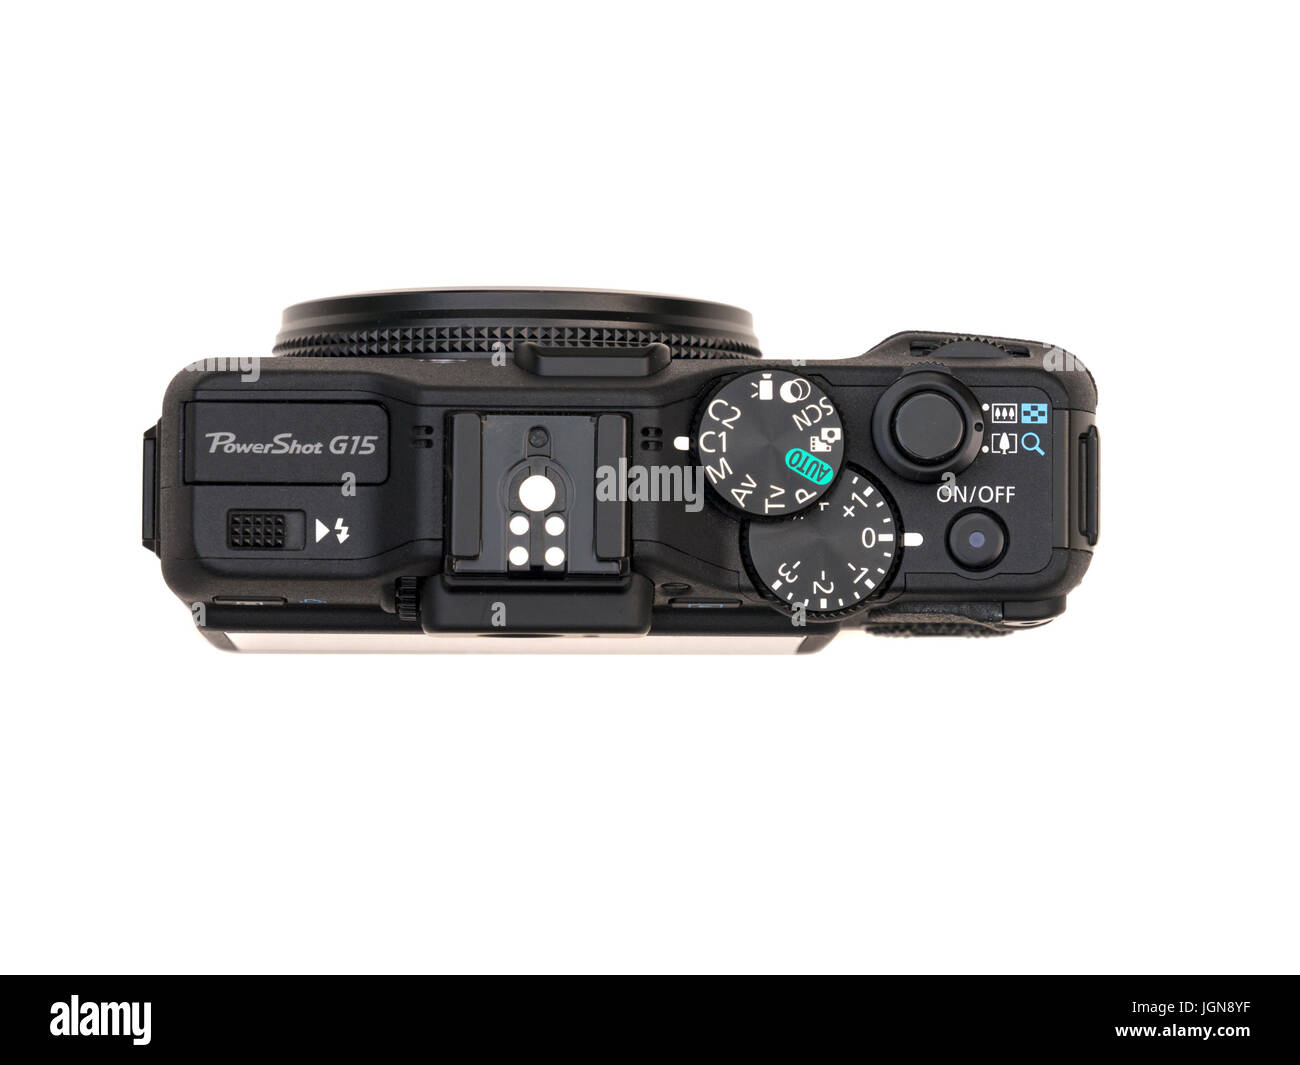 View of top plate of Canon Powershot G15 compact digital camera with dials and flash hot-shoe on white background Stock Photo